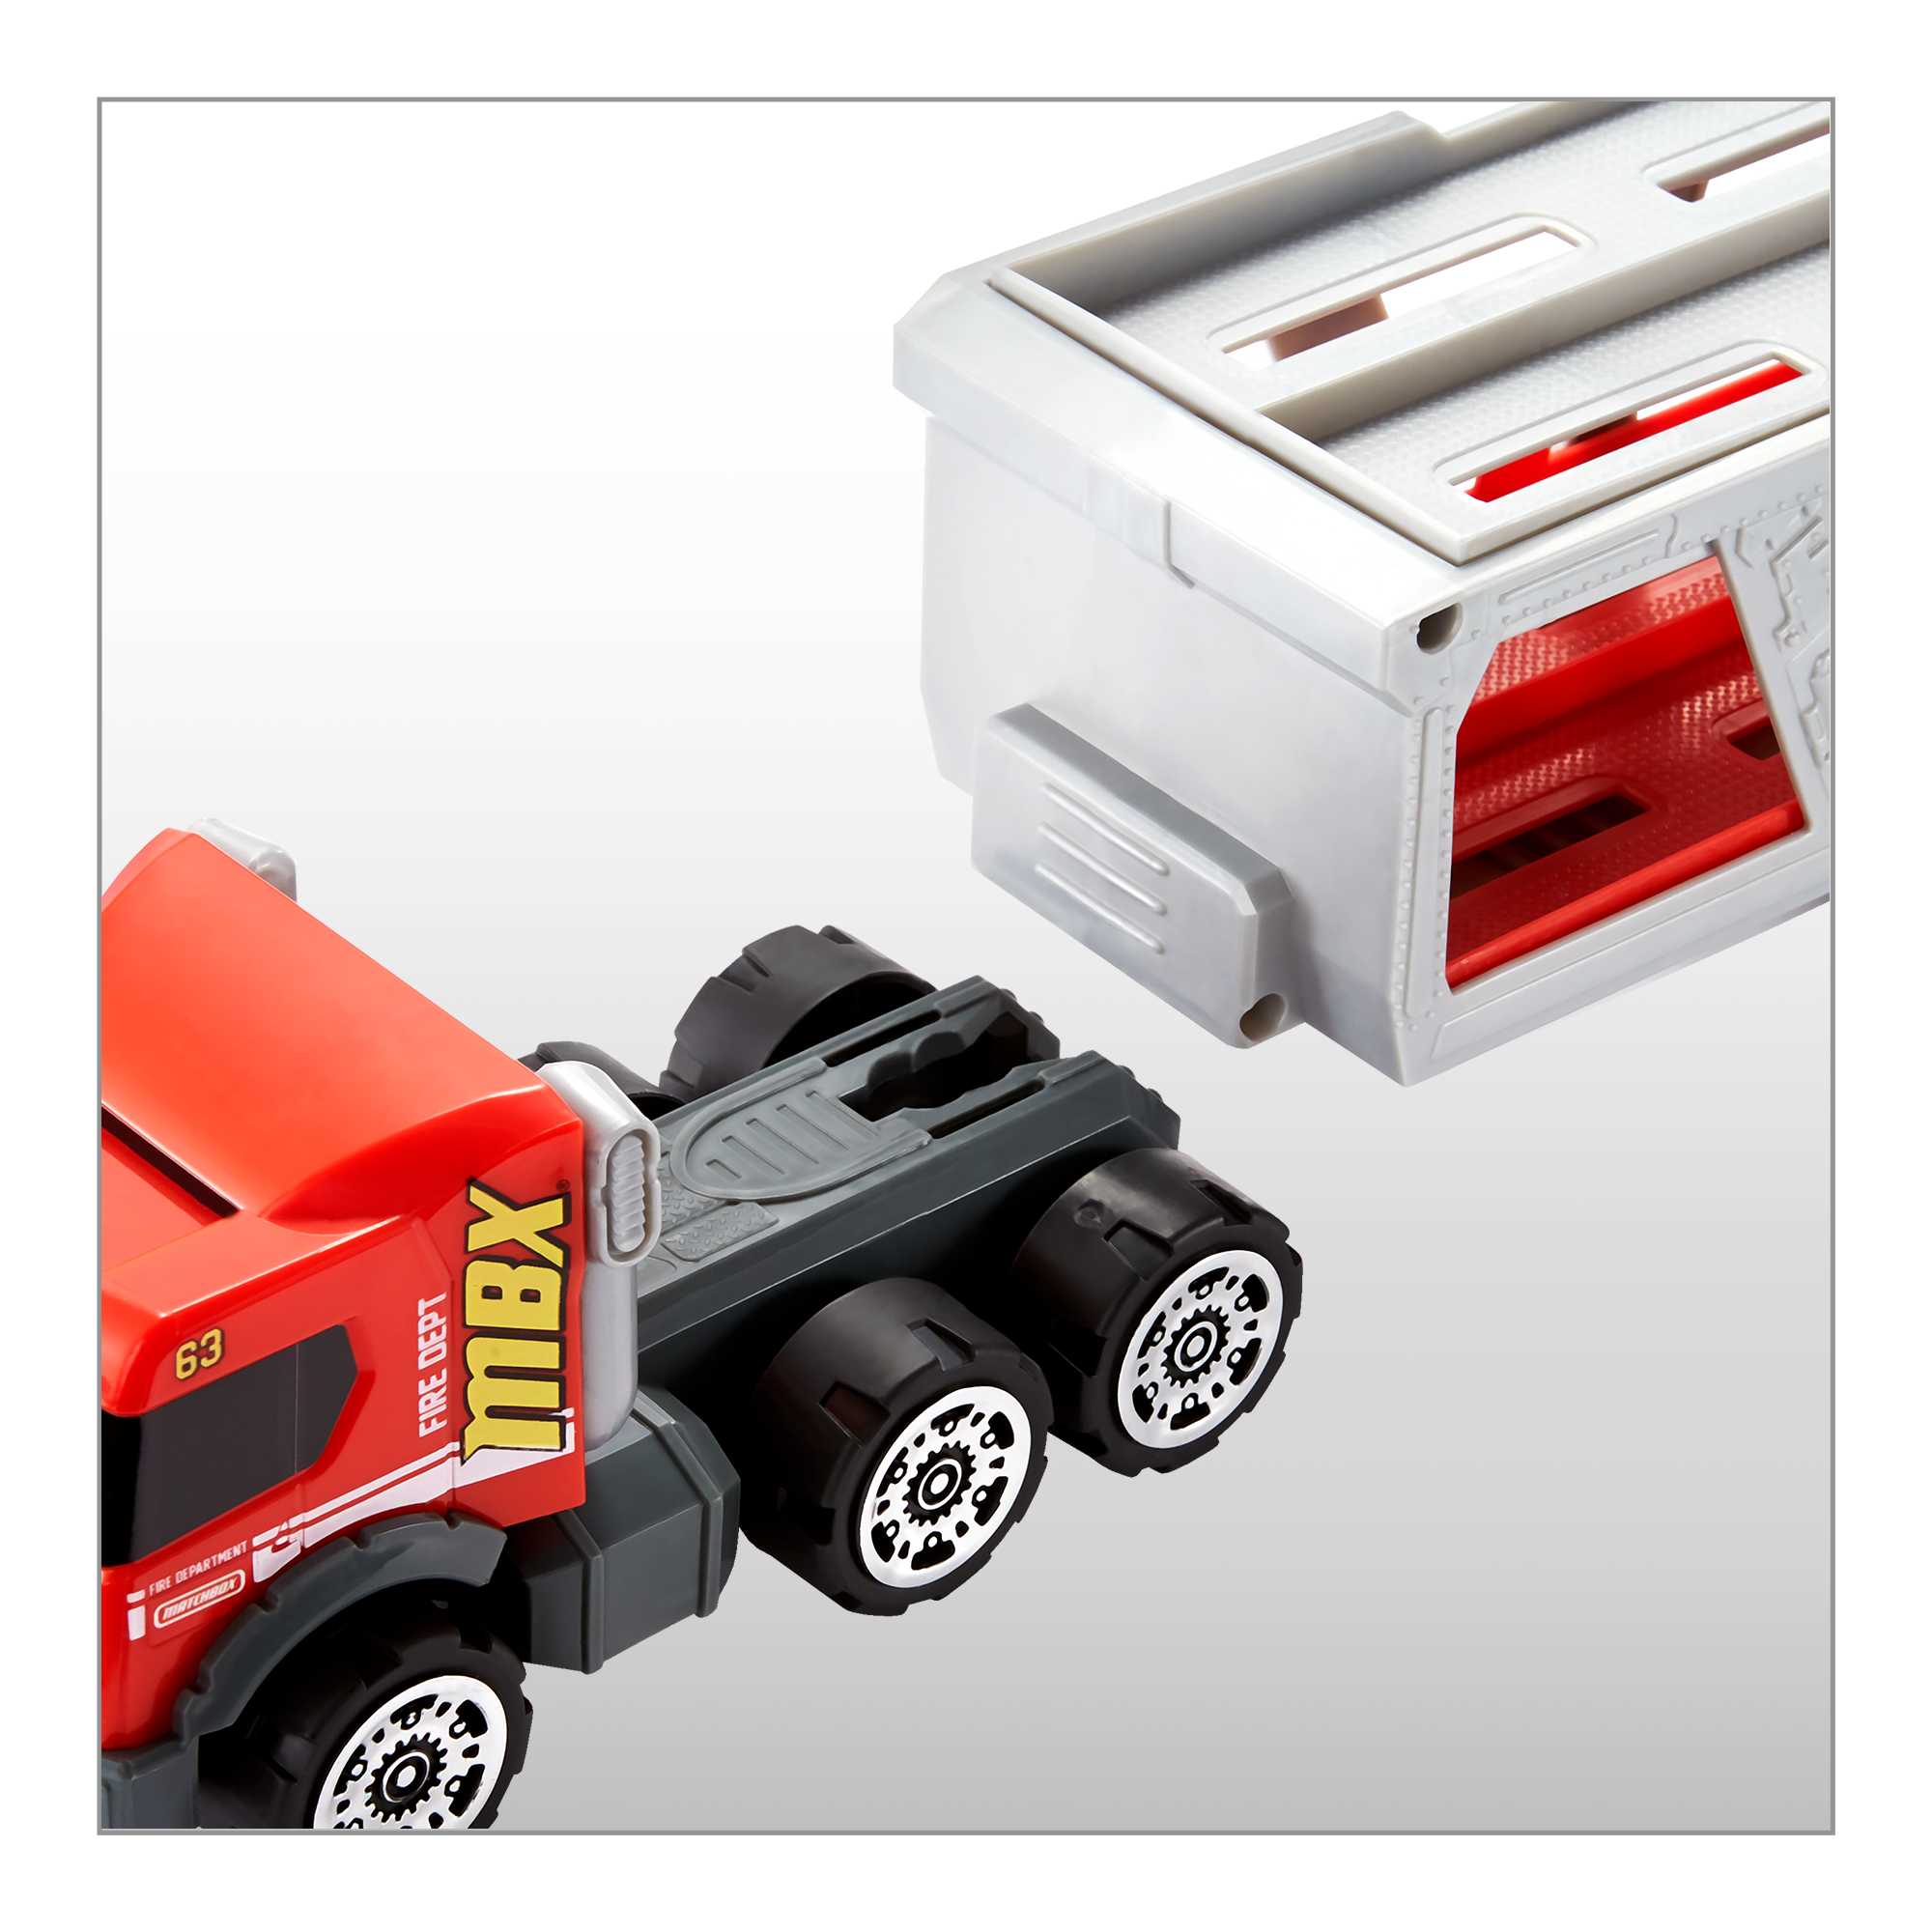 Matchbox Fire Rescue Hauler Playset with Detachable Cab, 1:64 Scale Toy Firetruck & 8 Accessories - image 4 of 10